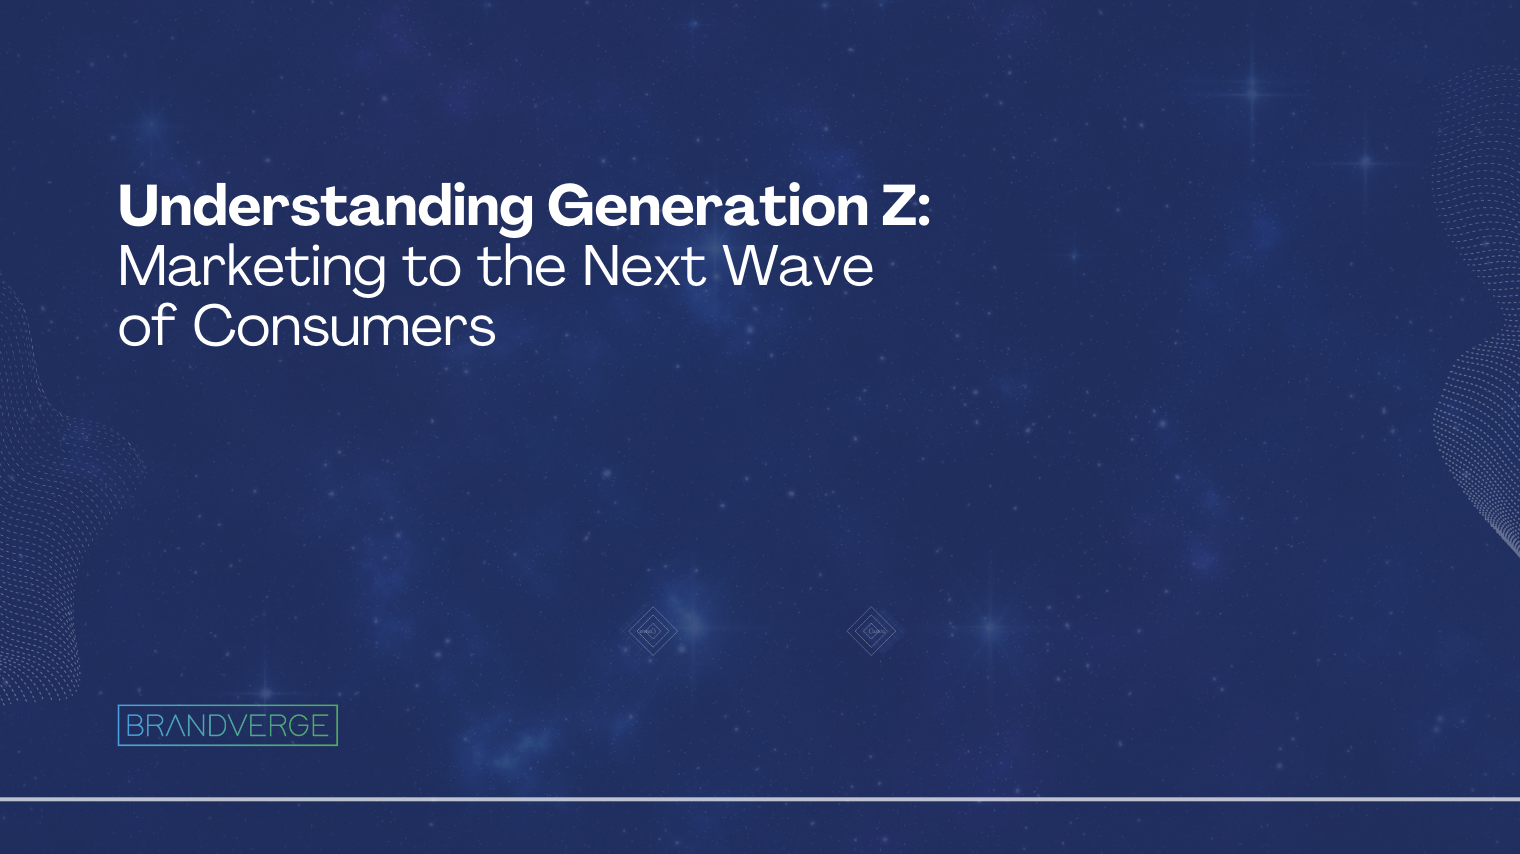 Understanding Generation Z: Marketing to the Next Wave of Consumers